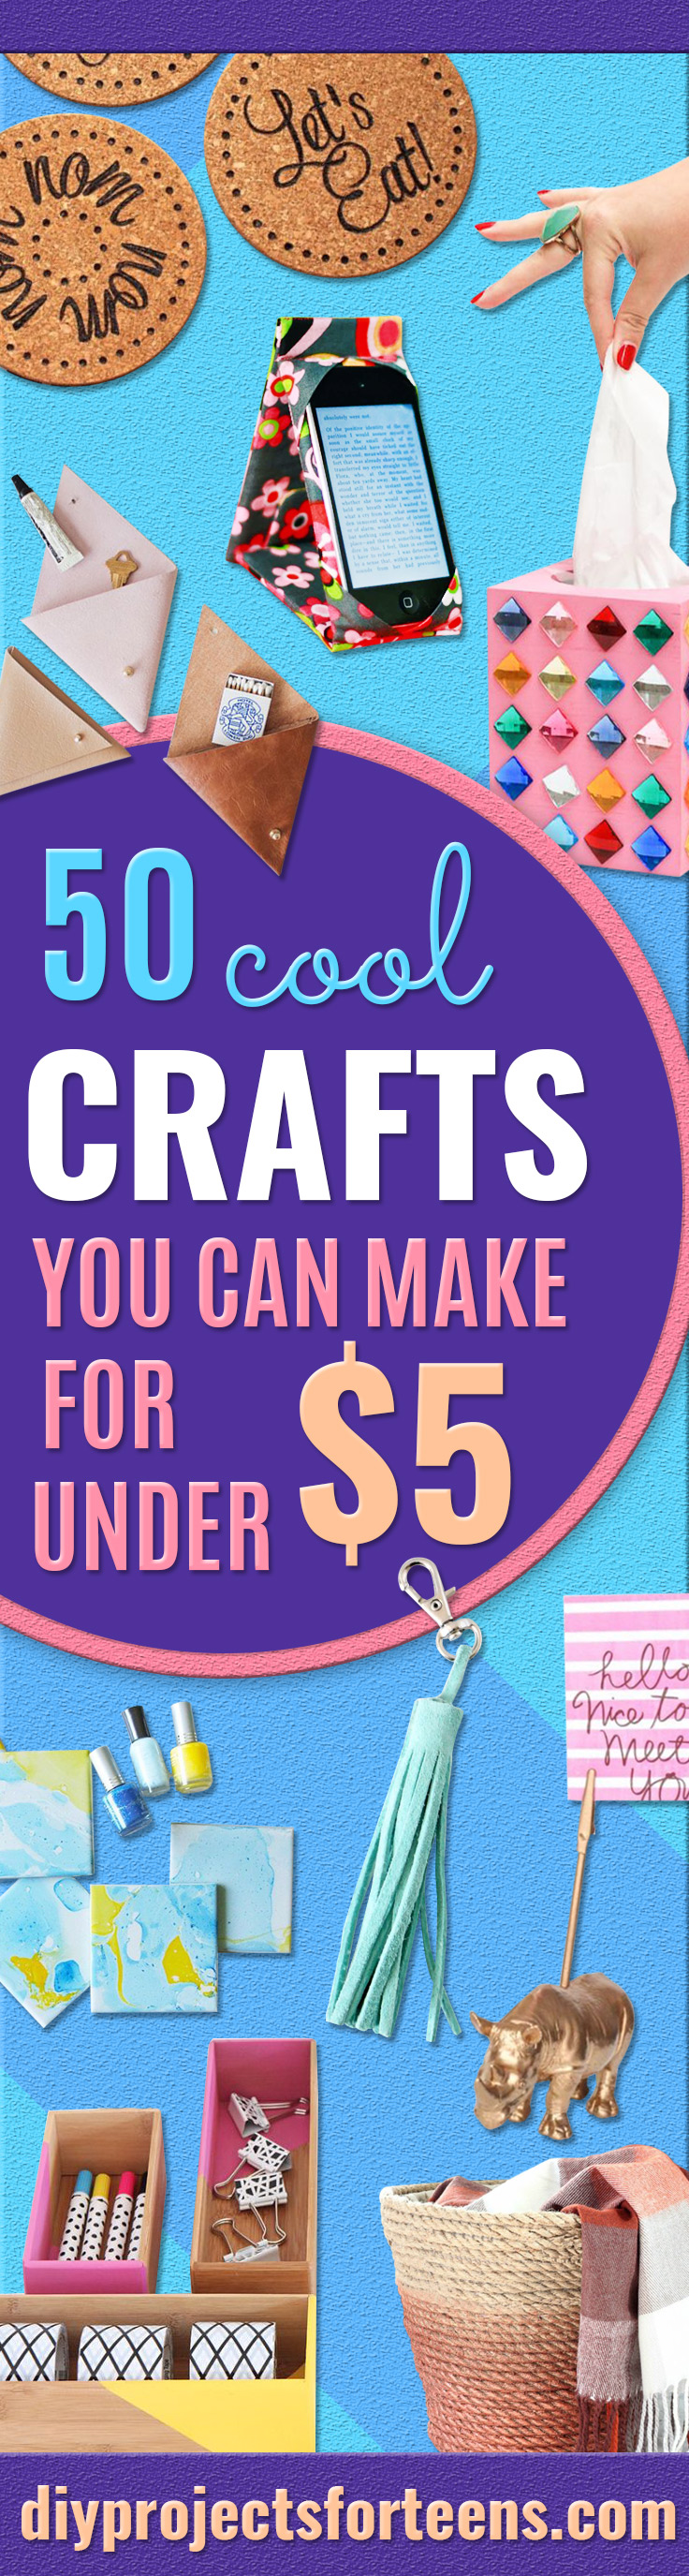 Cheap Crafts for Teens - Inexpensive DIY Projects for Teenagers and Tweens - Cute Room Decor, School Supplies, Accessories and Clothing You Can Make On A Budget - Fun Dollar Store Crafts - Cool DIY Gift Ideas for Christmas, Birthdays, BFF gifts and more - Step by Step Tutorials and Instructions #cheapcrafts #dollarstorecrafts #teencrafts #dollartreecrafts